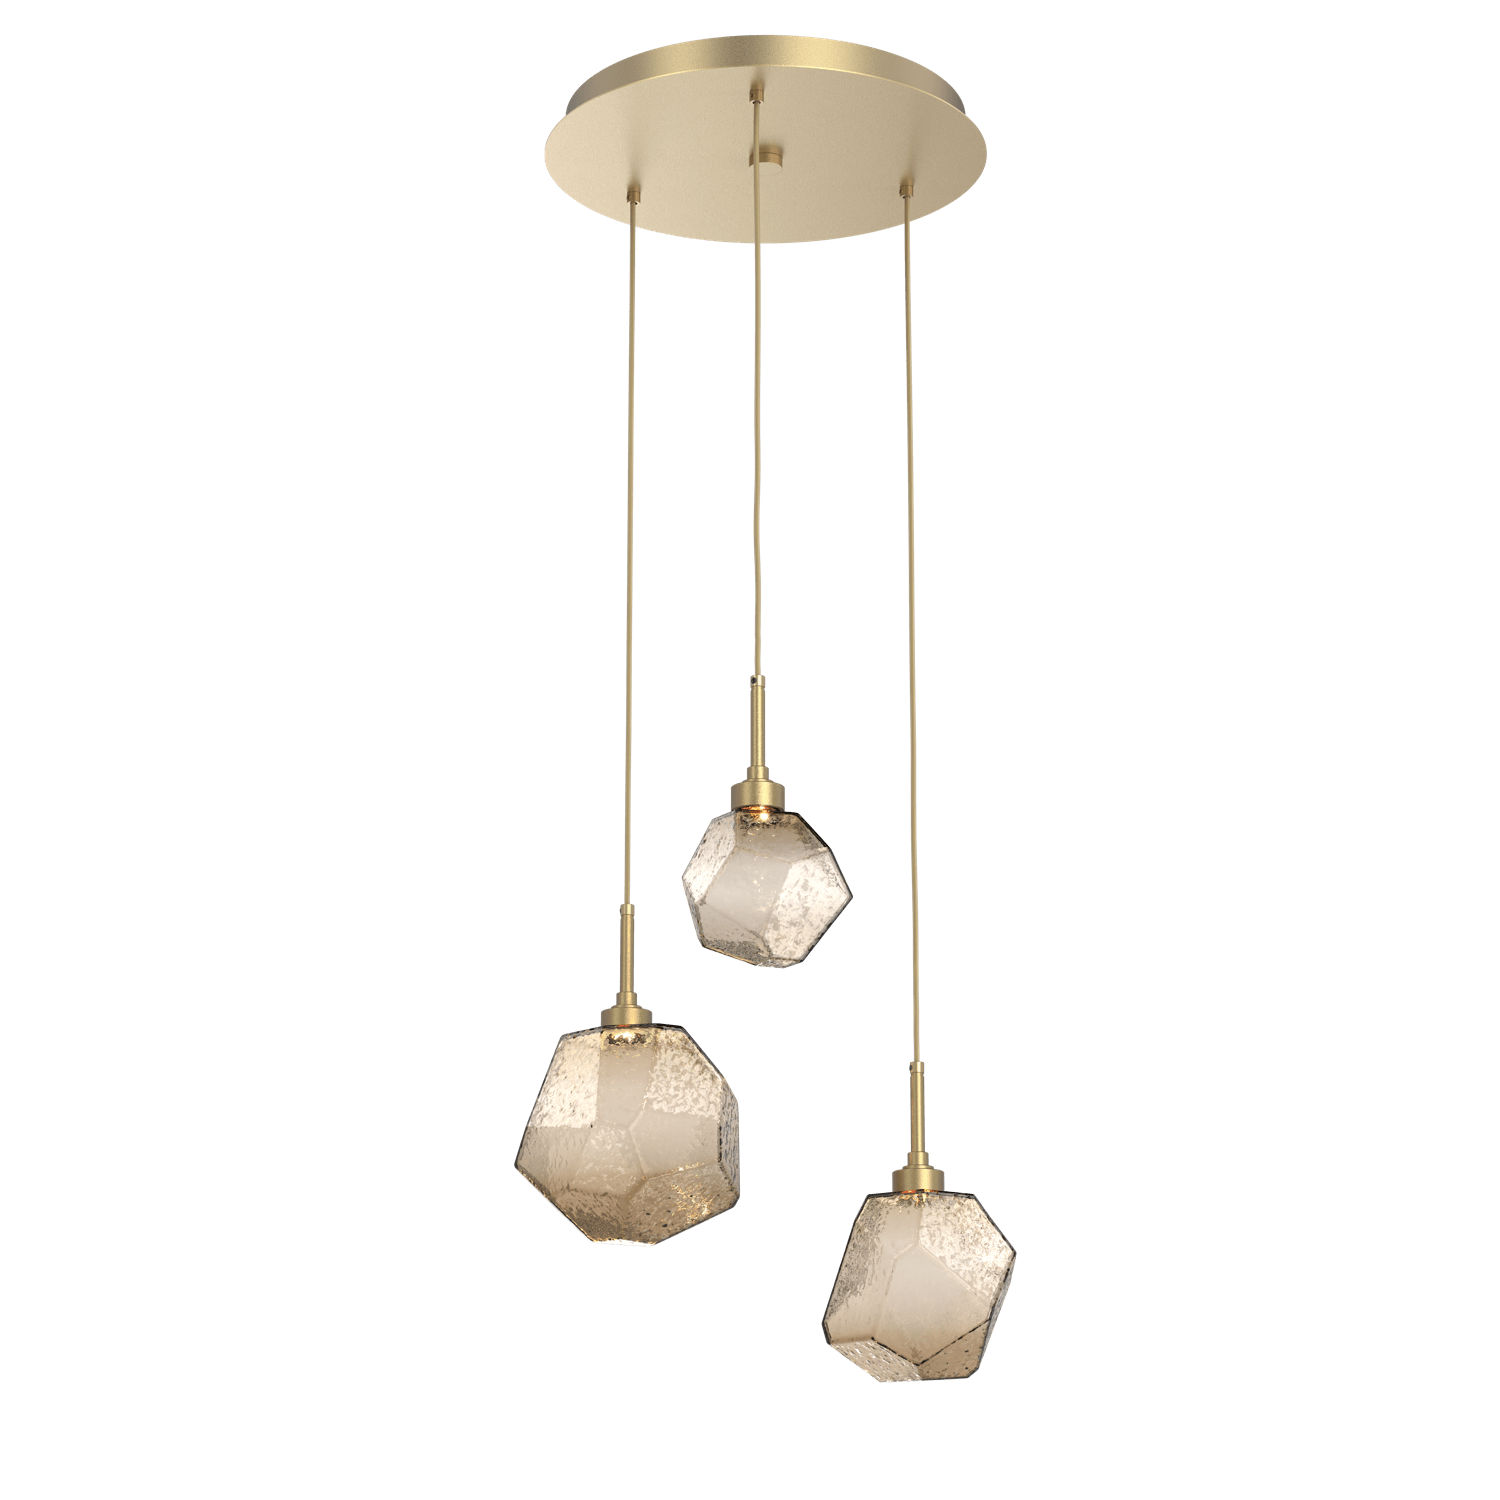 CHB0039-03-GB-B-Hammerton-Studio-Gem-3-light-round-pendant-chandelier-with-gilded-brass-finish-and-bronze-blown-glass-shades-and-LED-lamping